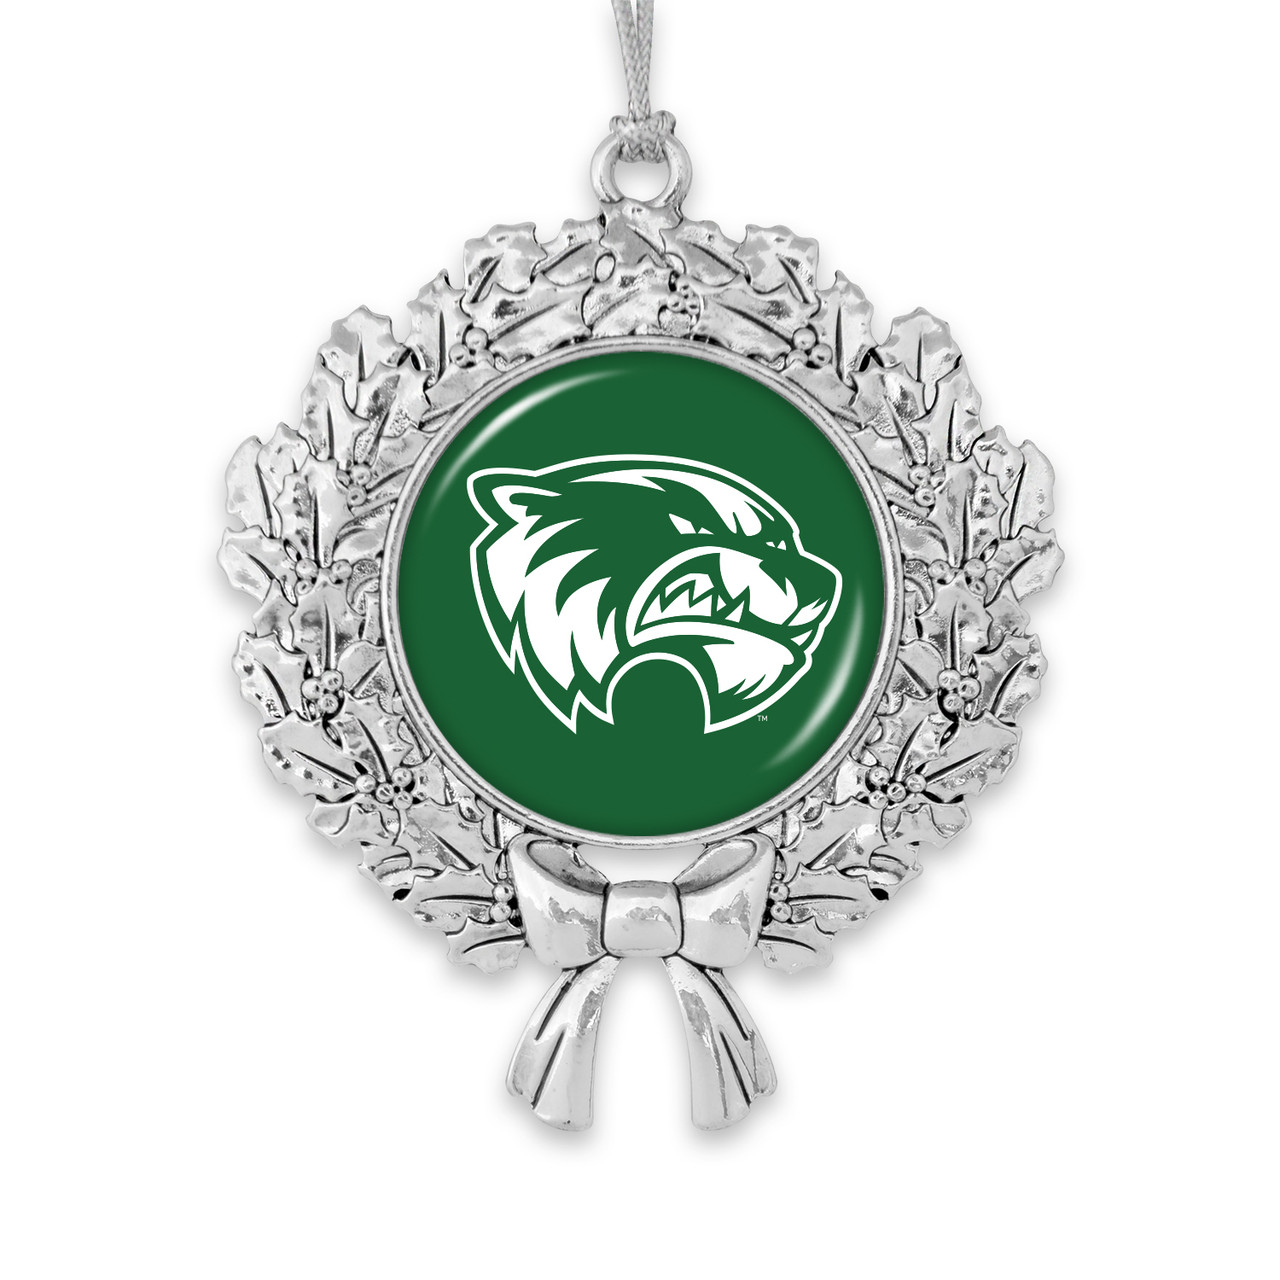 Utah Valley Wolverines Christmas Ornament- Wreath with Team Logo